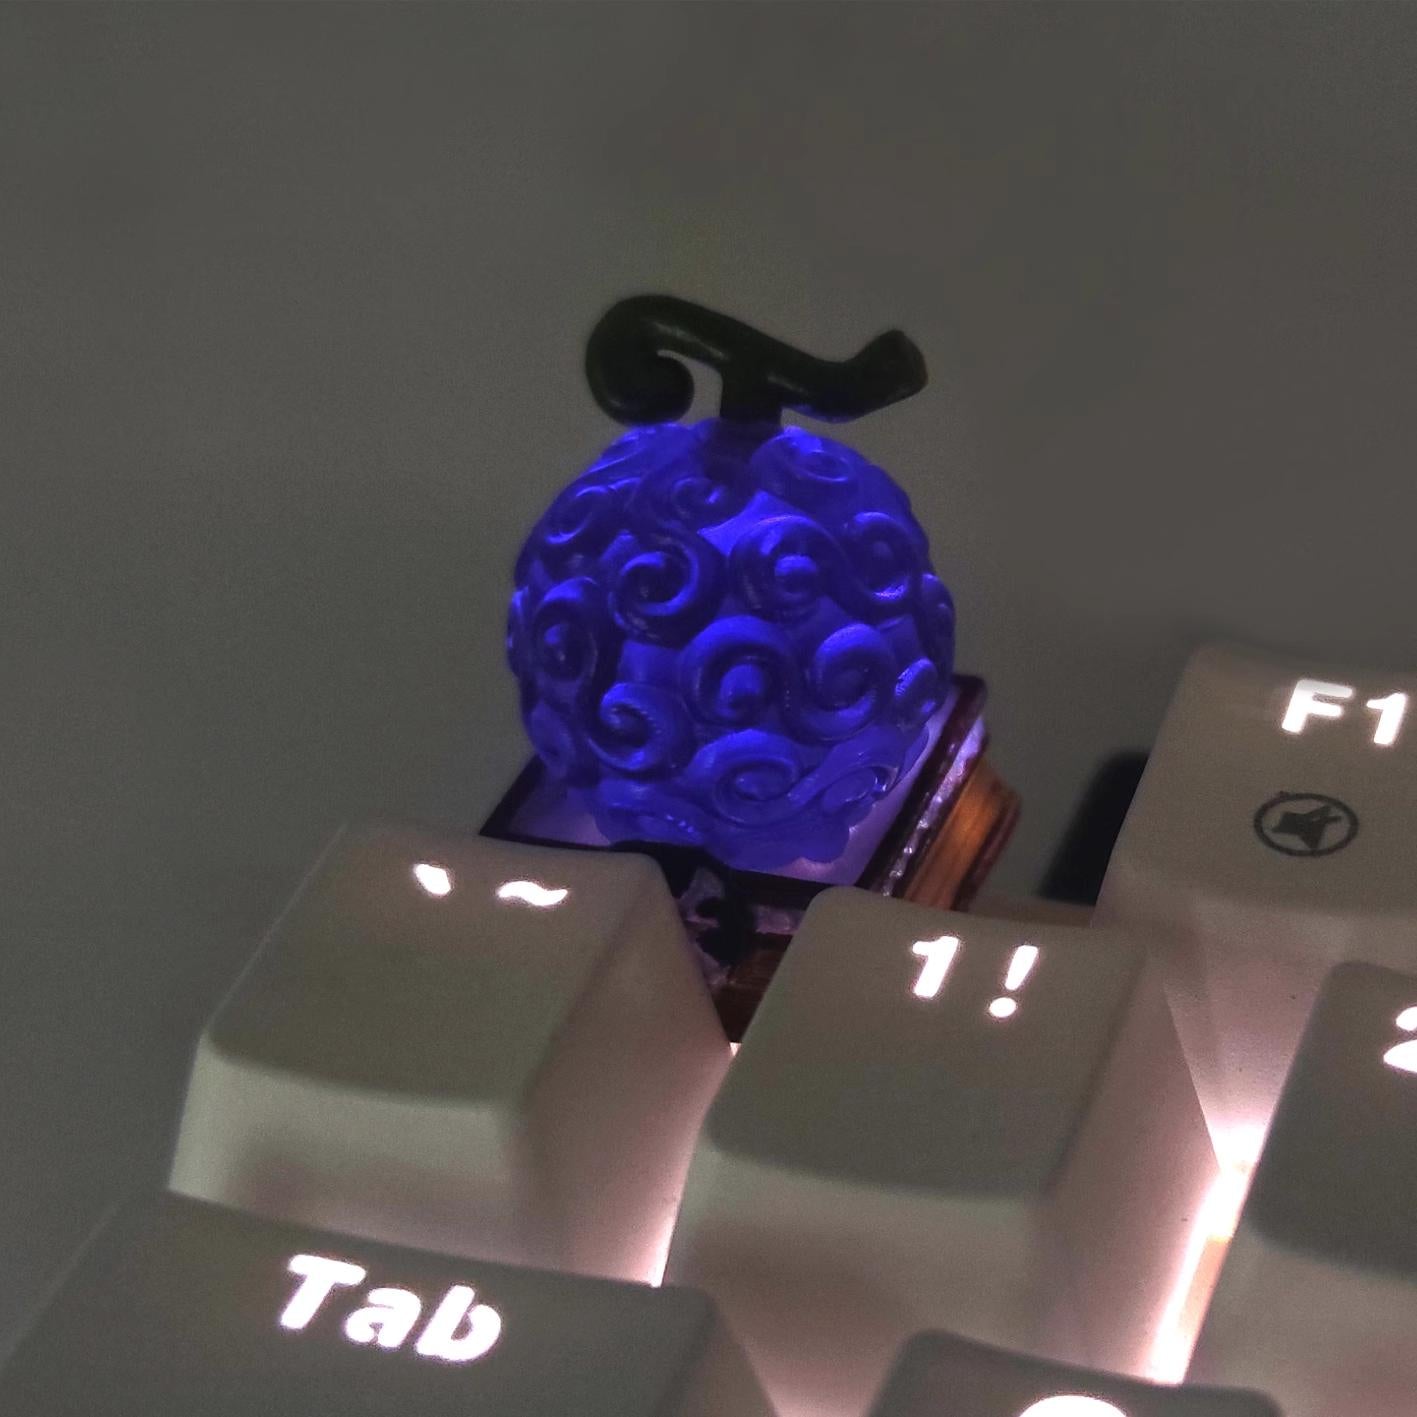 🍇 Fruit of the Devil: Each keycap is a miniature masterpiece, capturing the essence of the Devil's Fruit from the ONE PIECE world. Indulge in the intricate details and vibrant colors that bring these mythical fruits to life.